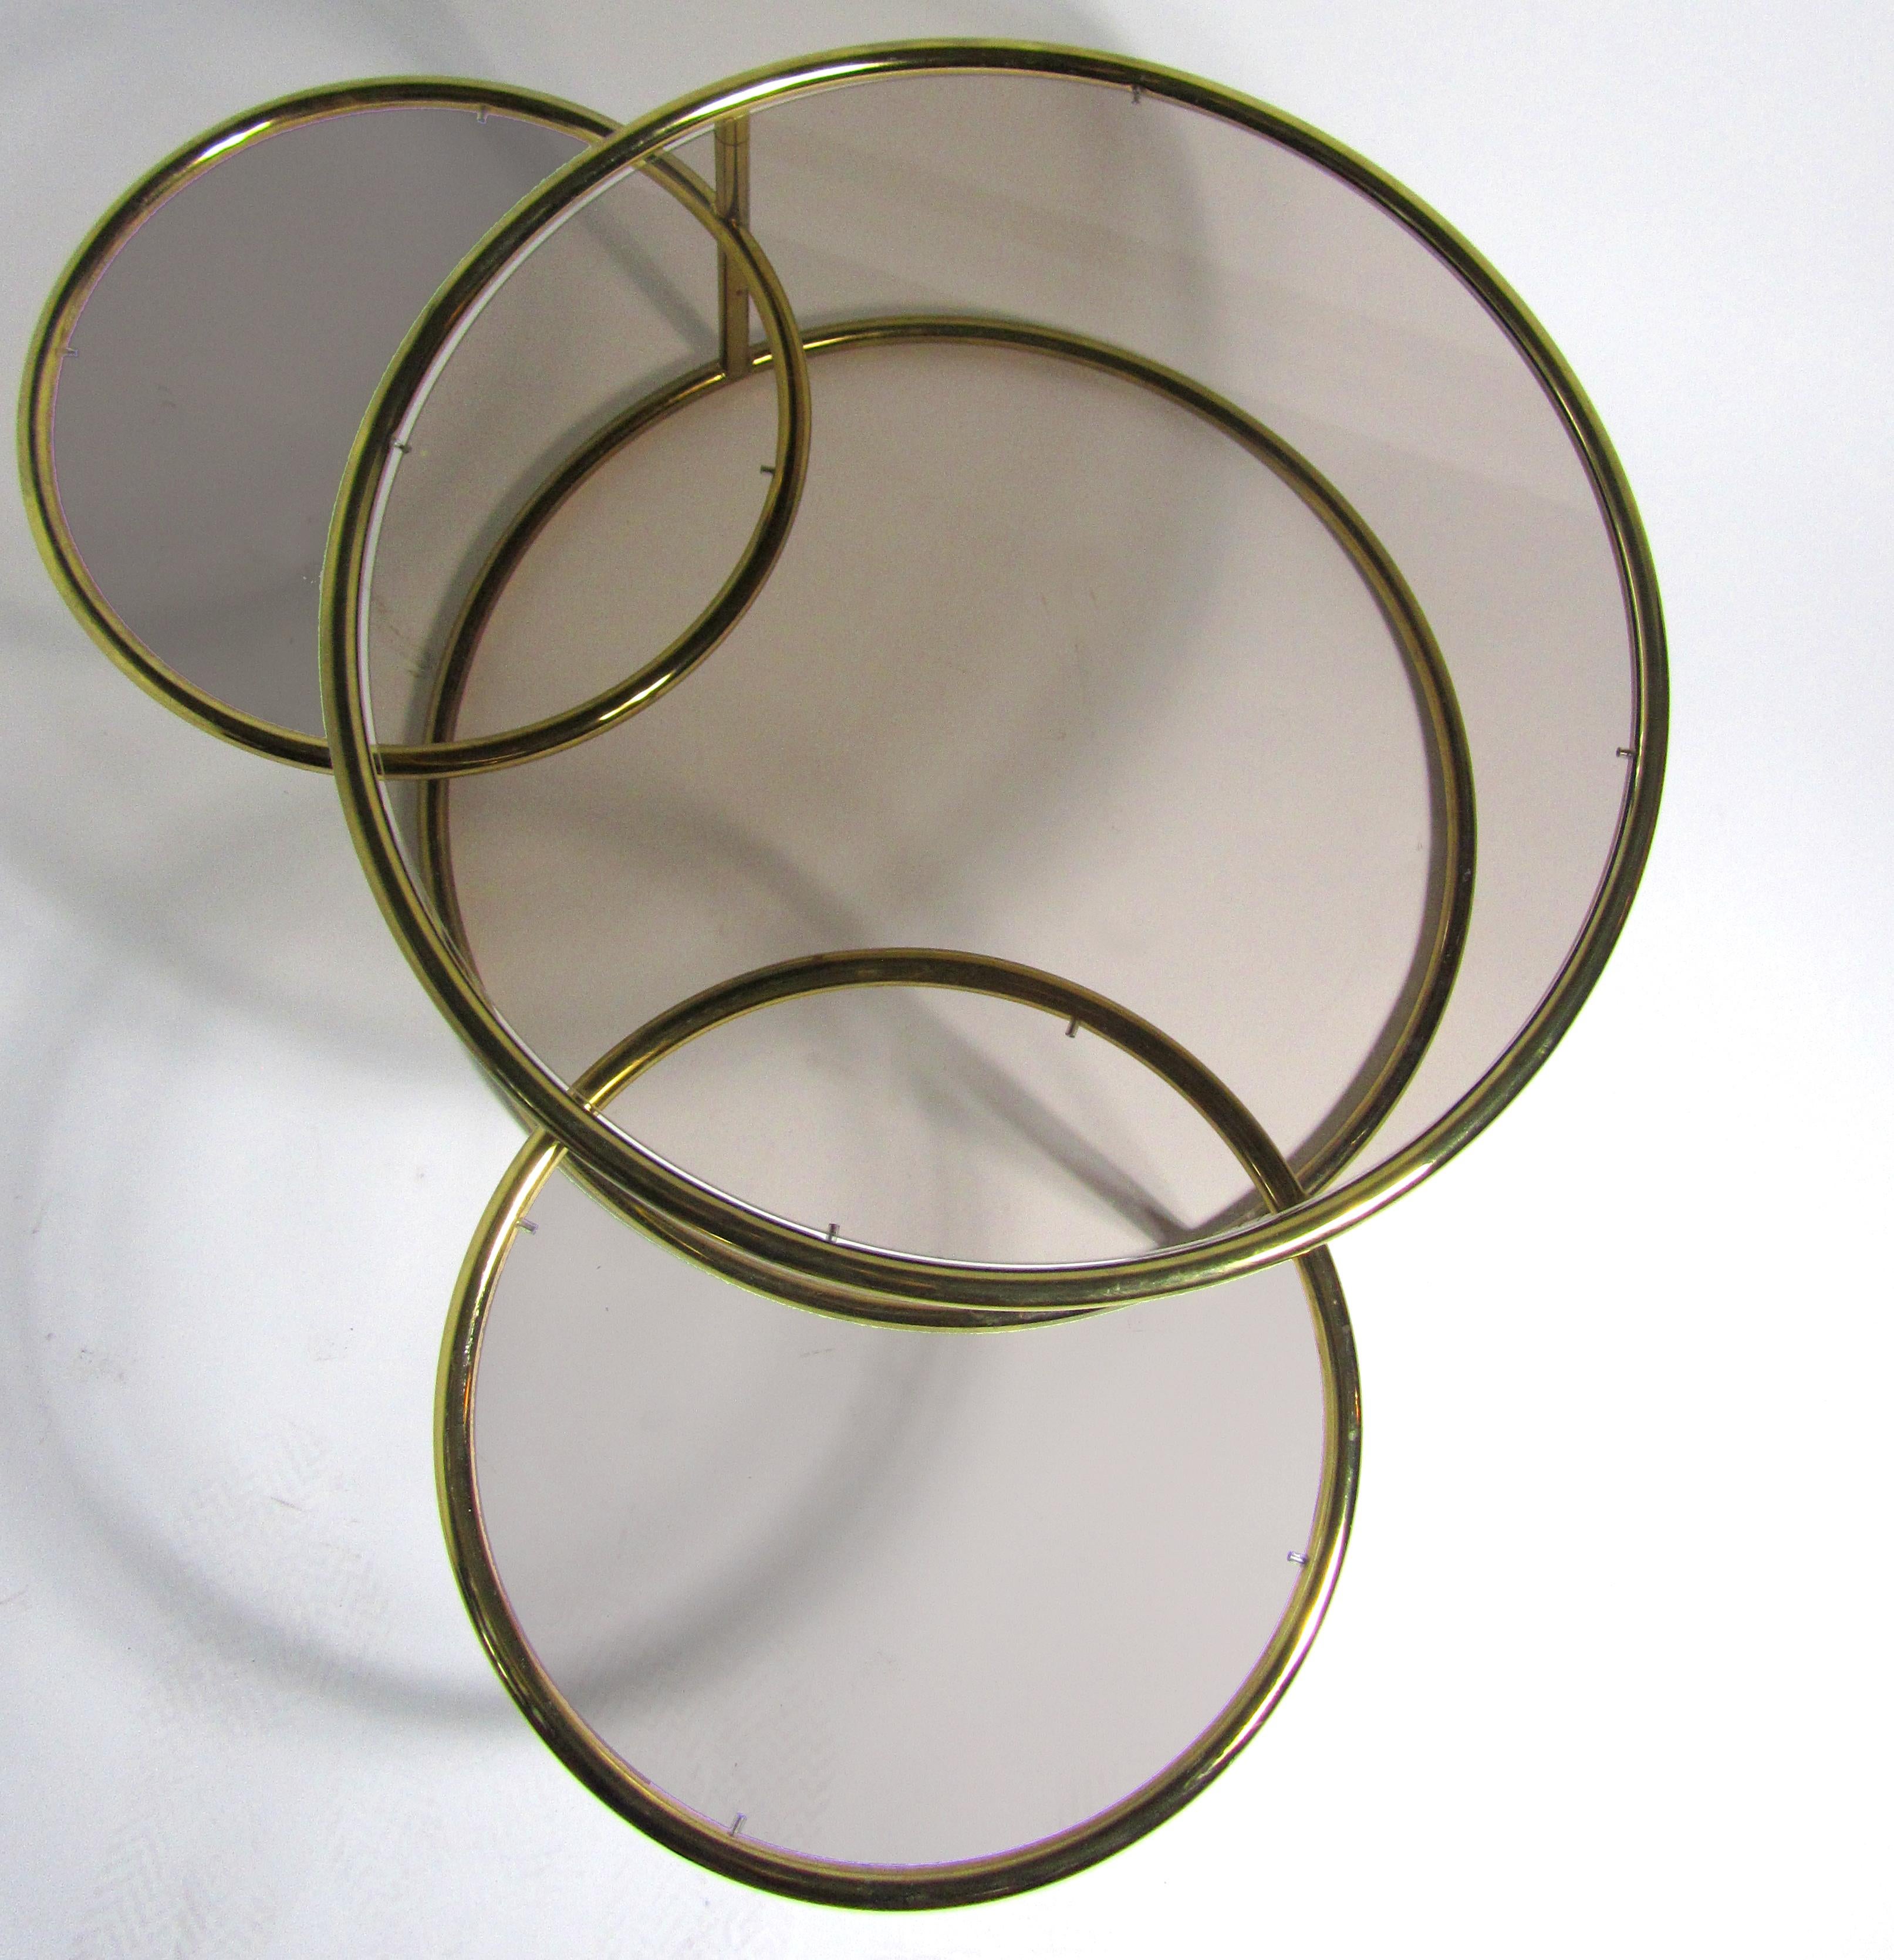 American modern brass and smoked glass three-ring coffee table by Milo Baughman. This versatile table can fold to take up a very small footprint. The table jacknife opens to have three rings exposed for additional surfaces area.